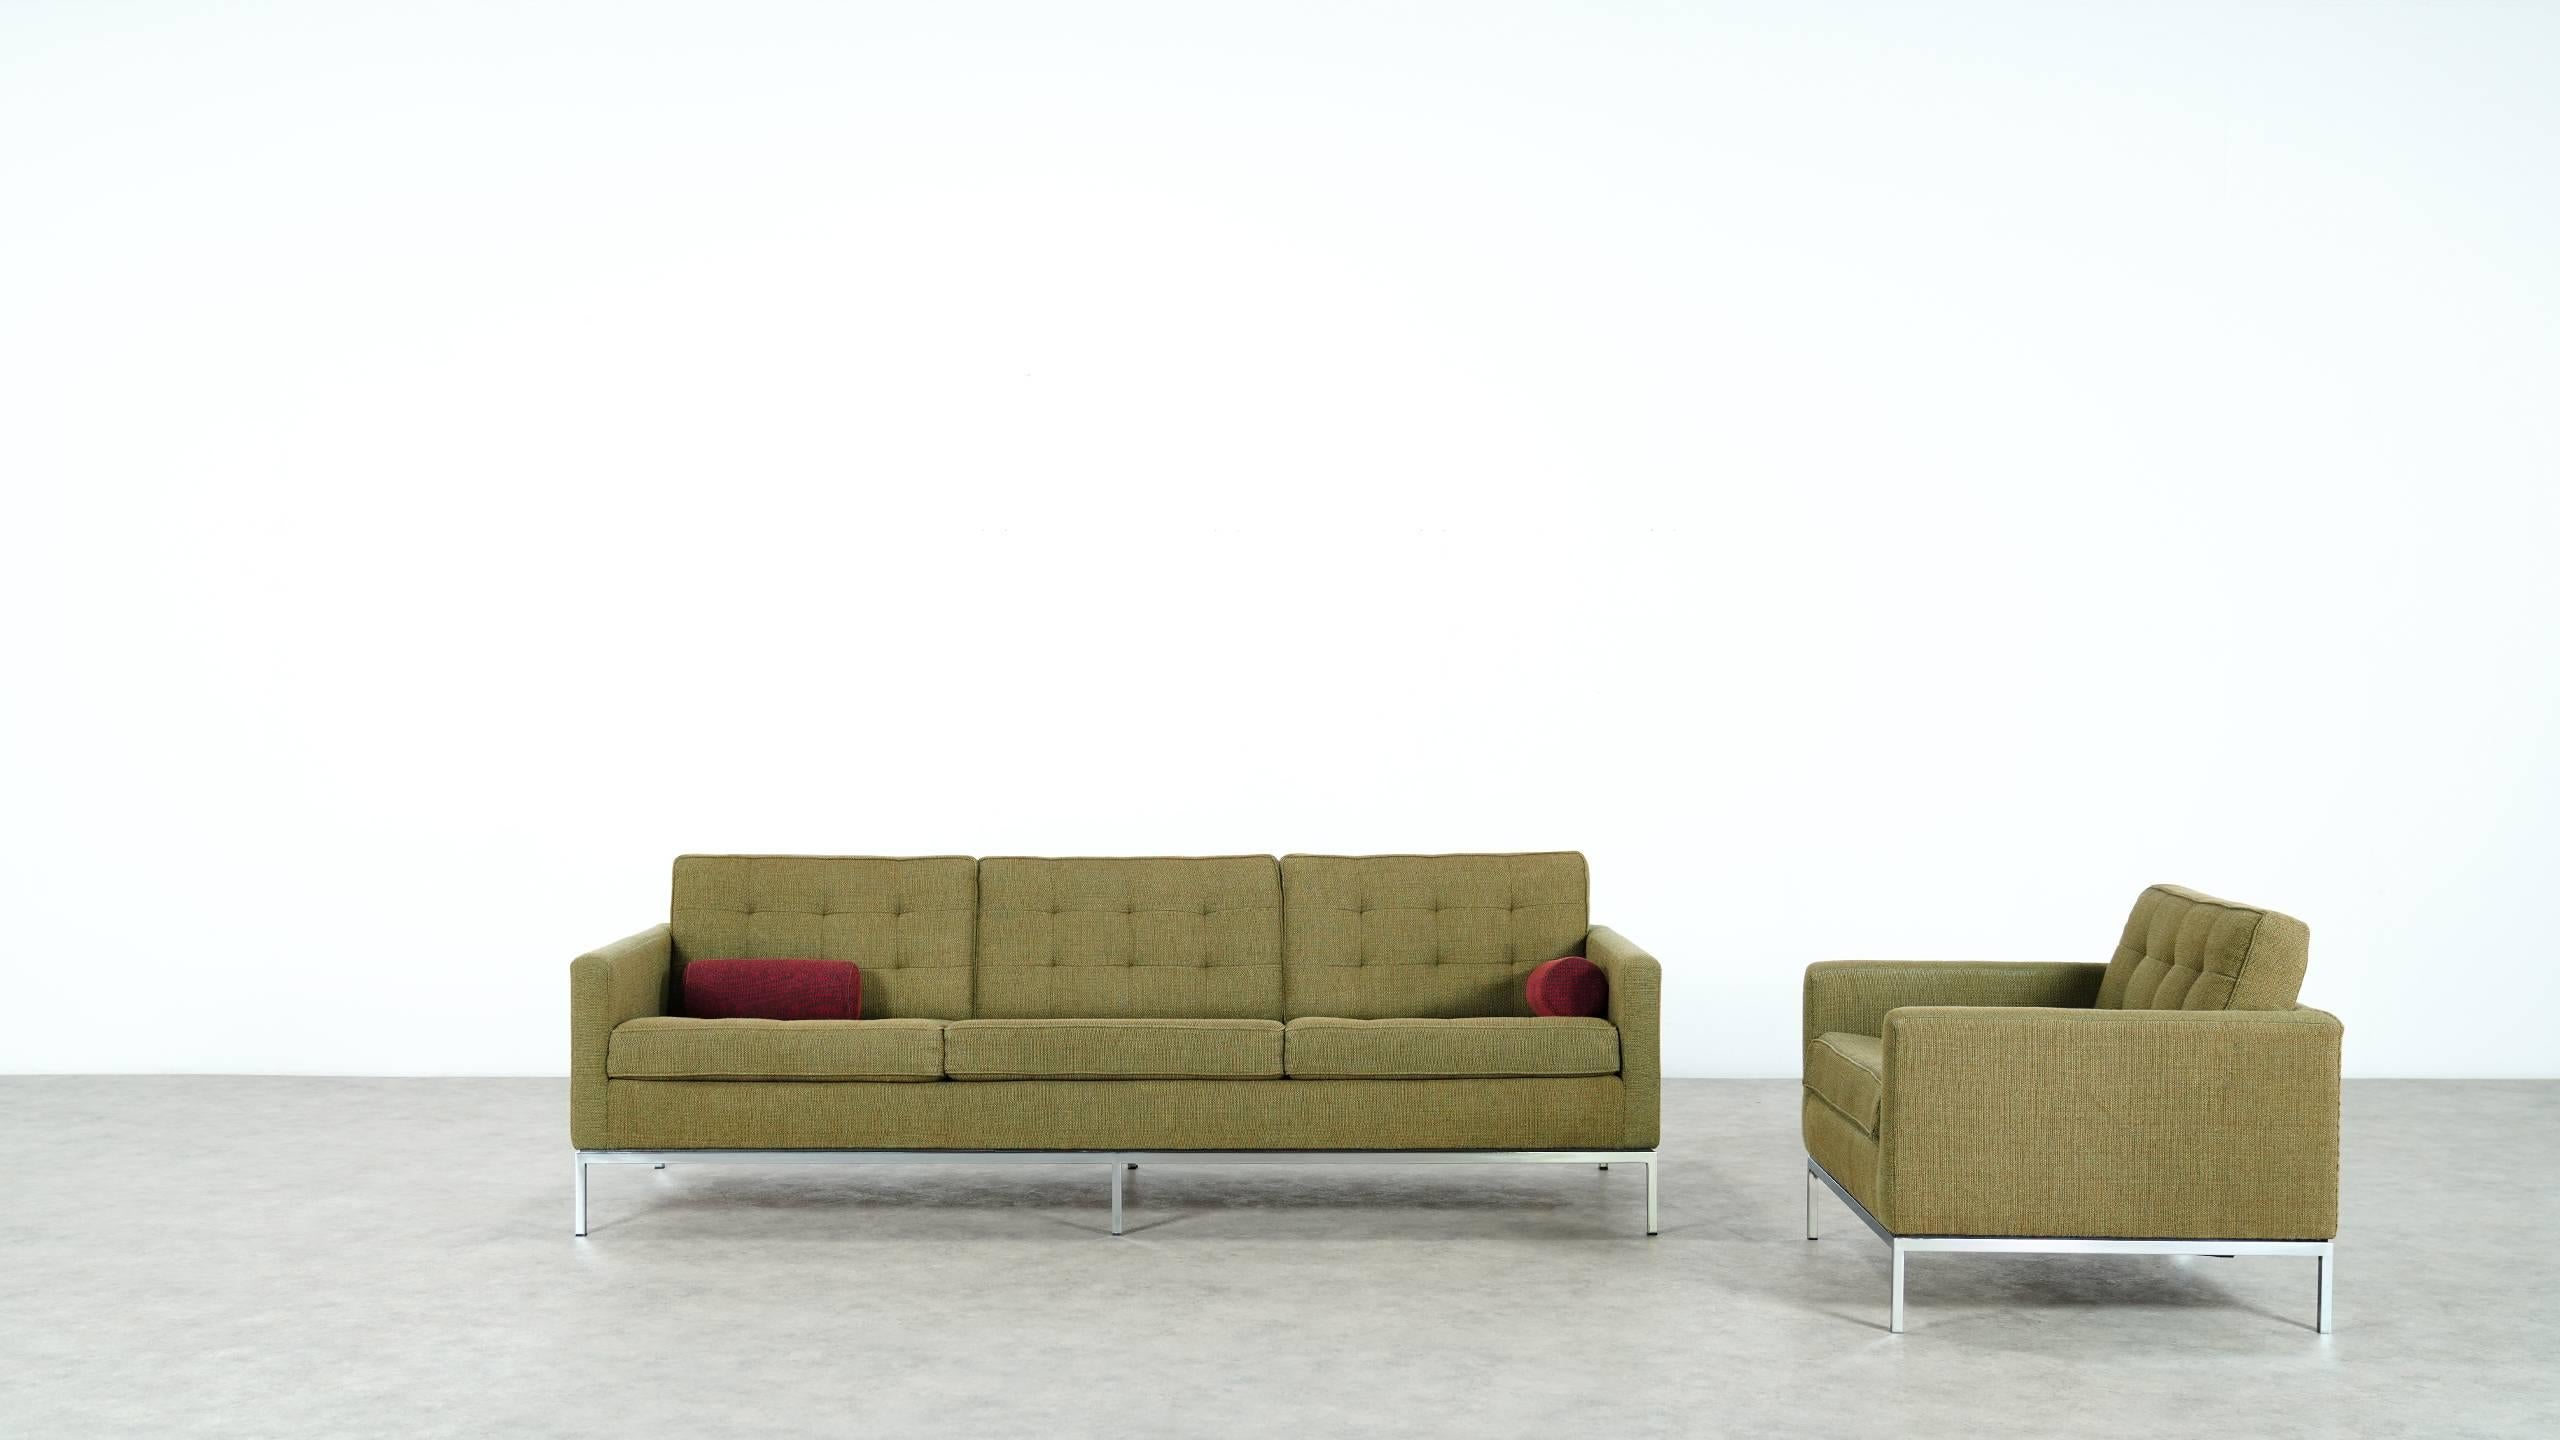 American Florence Knoll, Sofa and Lounge Chair, 1954 for Knoll International, in Kvadrat